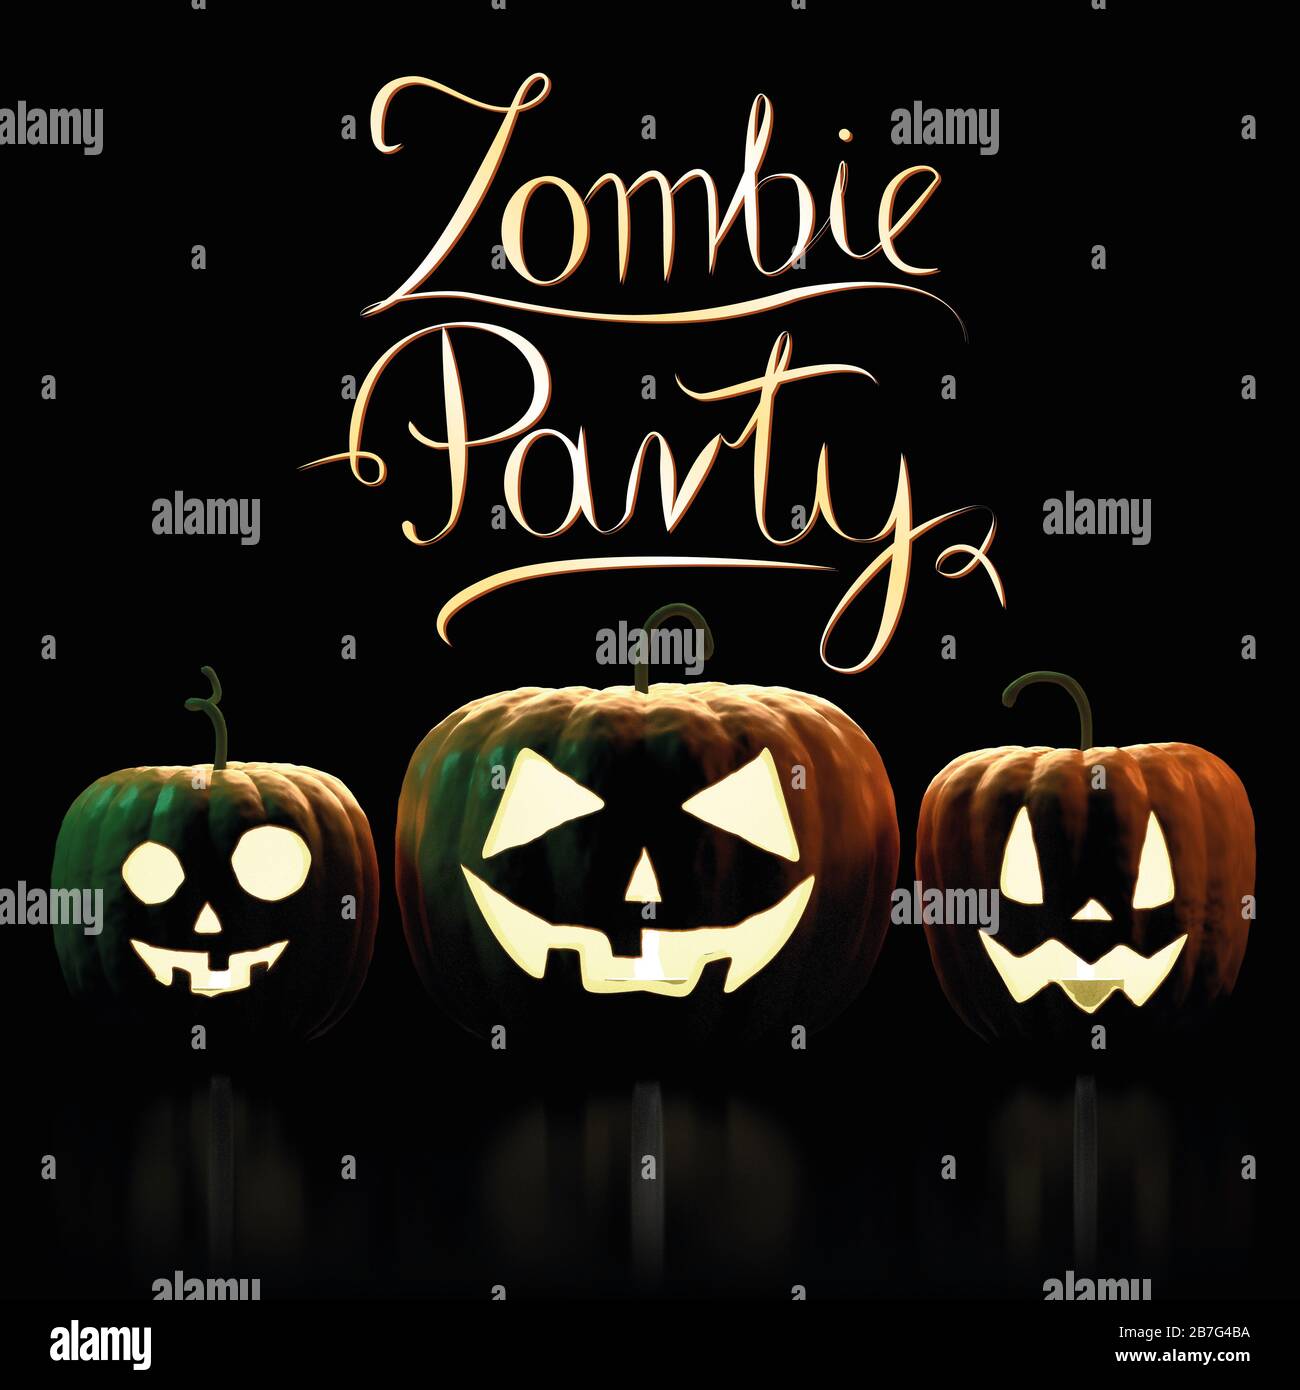 Zombie Party - Halloween card with three pumpkins Stock Photo